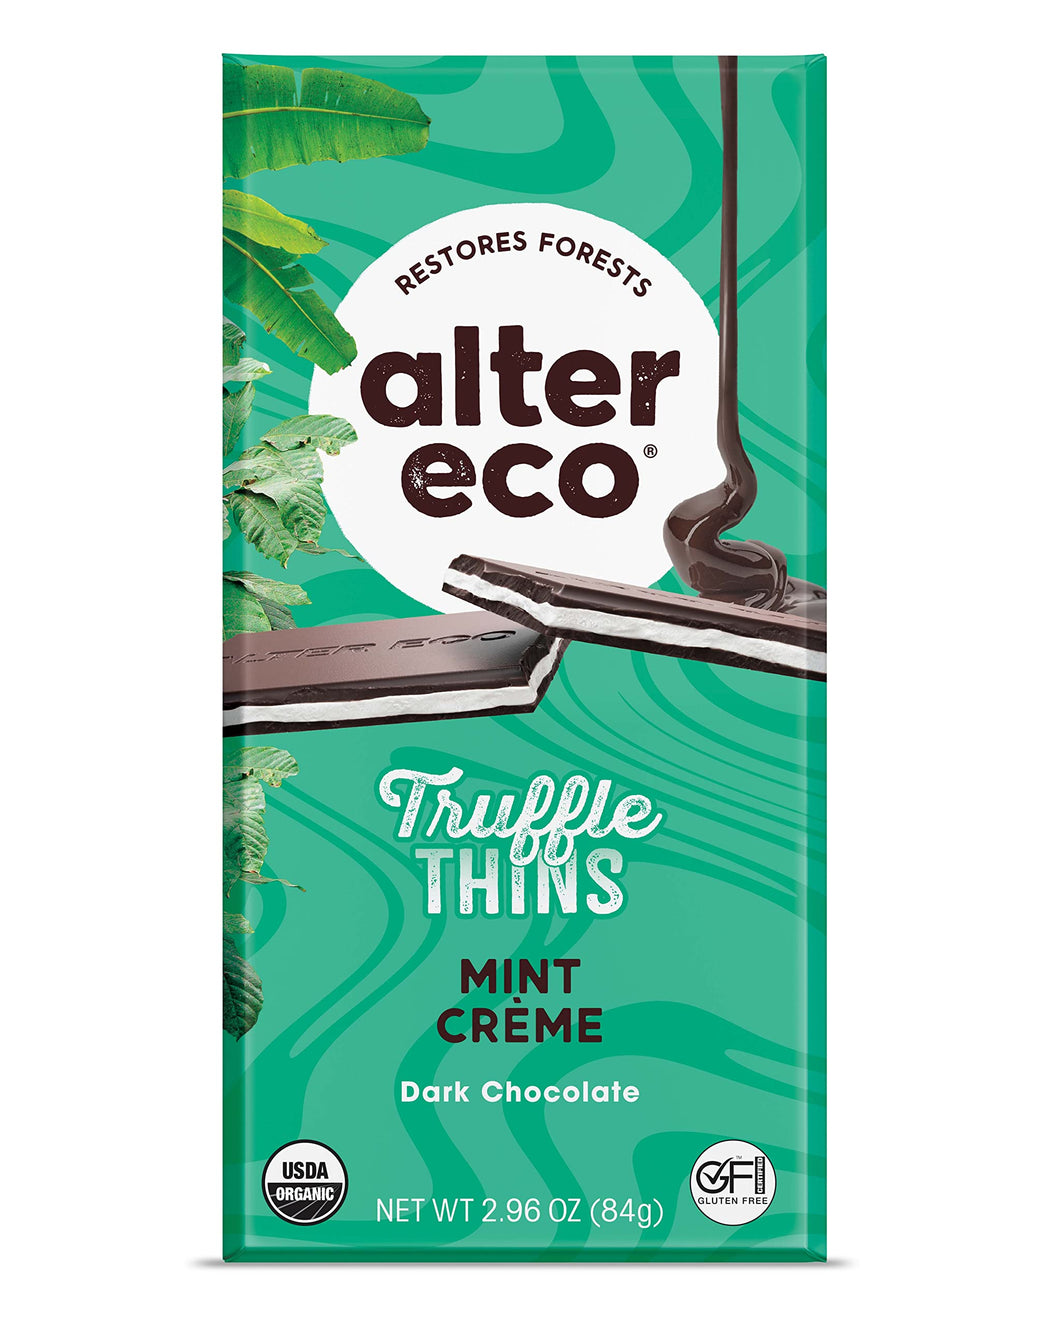 Alter Eco Mint Creme Truffle Thins, Chocolate Bar with Gooey Ganache Truffle Filling, Gluten-Free, Non-GMO Snacks, No Additives or Artificial Sweeteners, Fair Trade, Recyclable Packaging